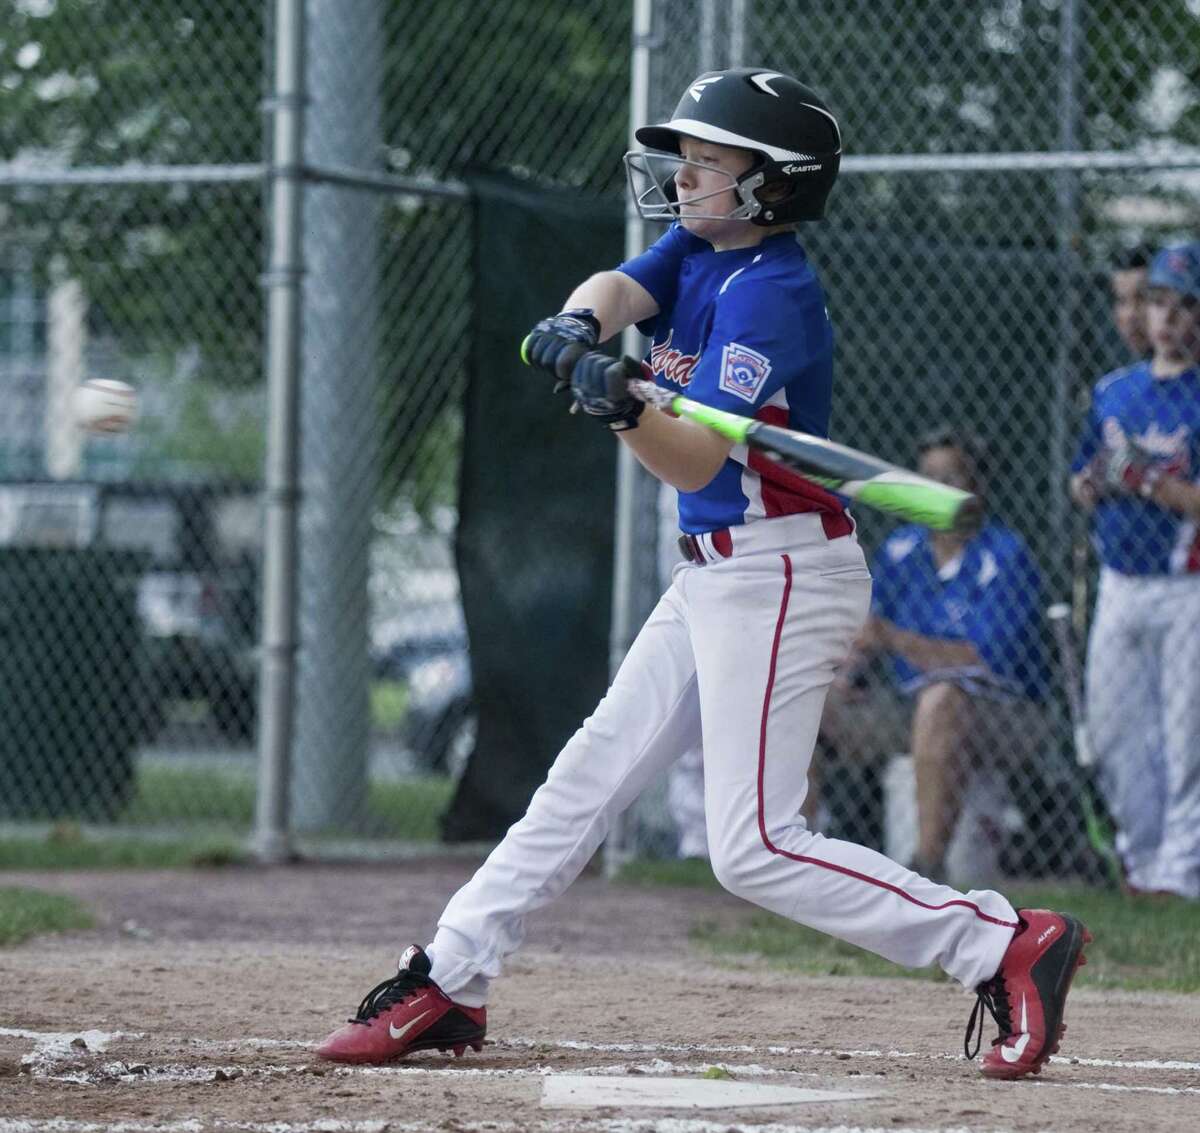 Stamford North's Miles Aquila swings at a pitch during the Little League playoffs against Wilton, played at Scalzi Park in Stamford. Wednesday, July 12, 2017